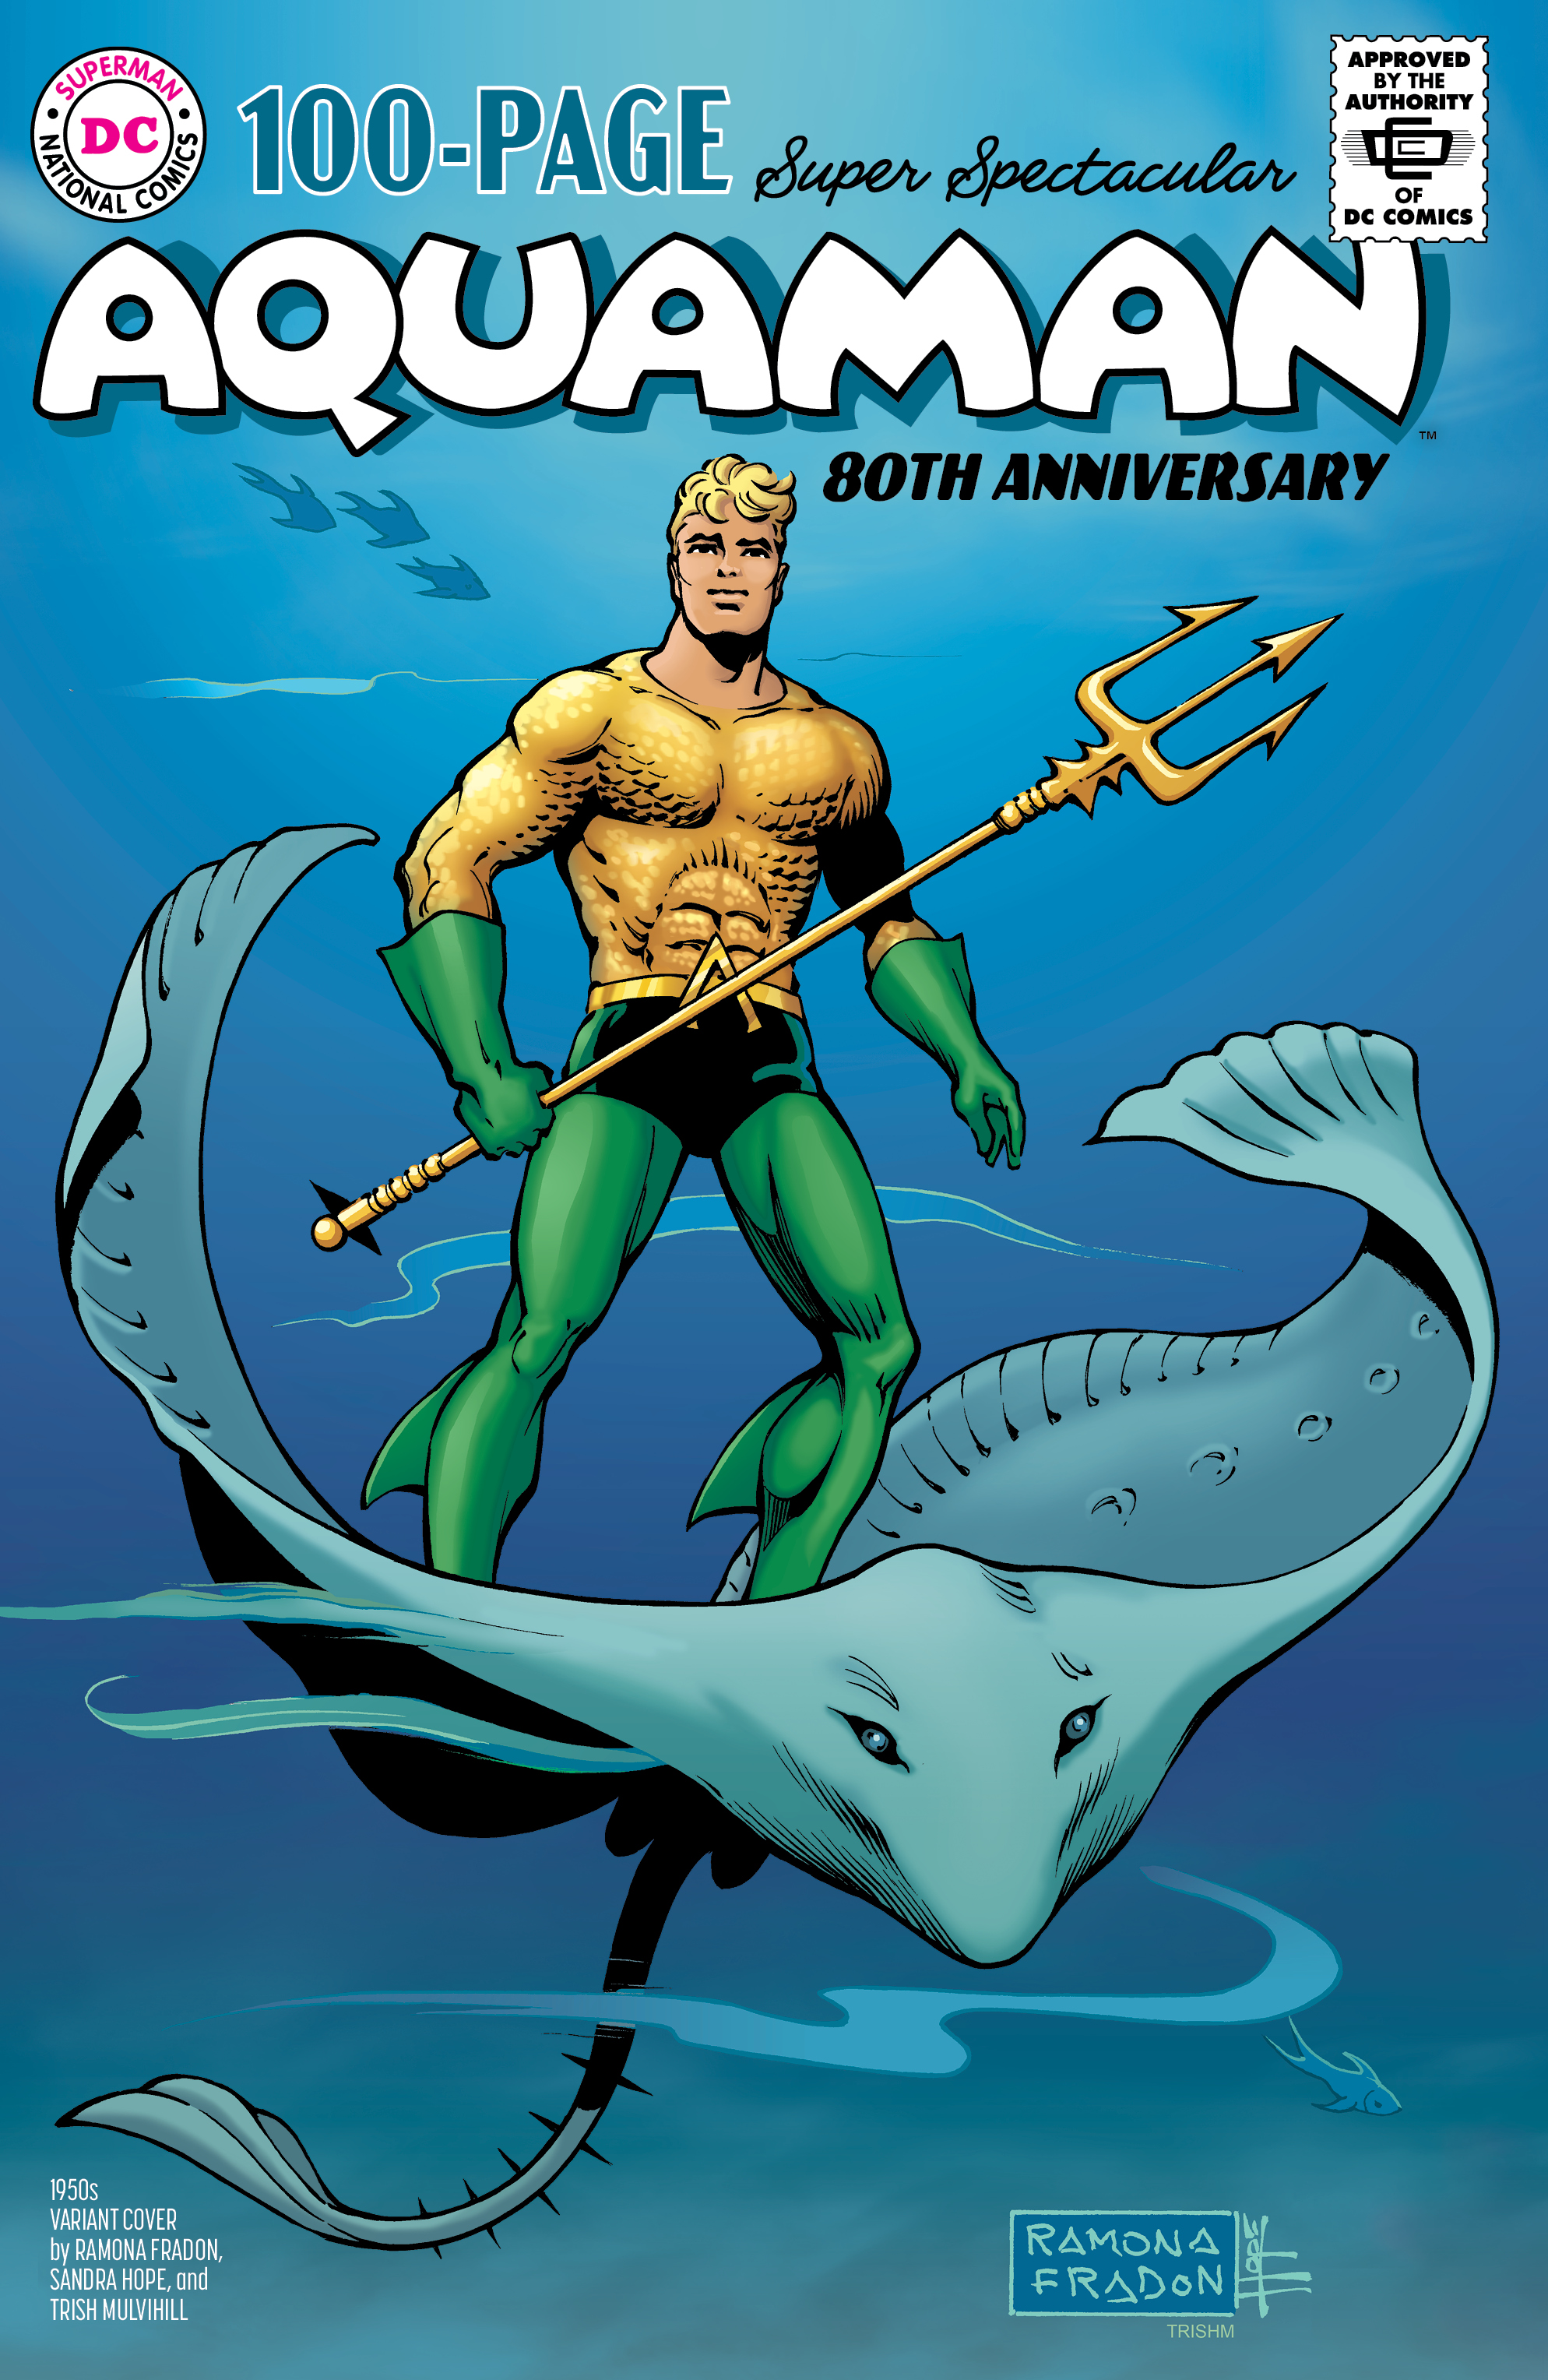 Aquaman 80th Anniversary 100-Page Super Spectacular #1 (One Shot) Cover C Fradon 1950s Variant